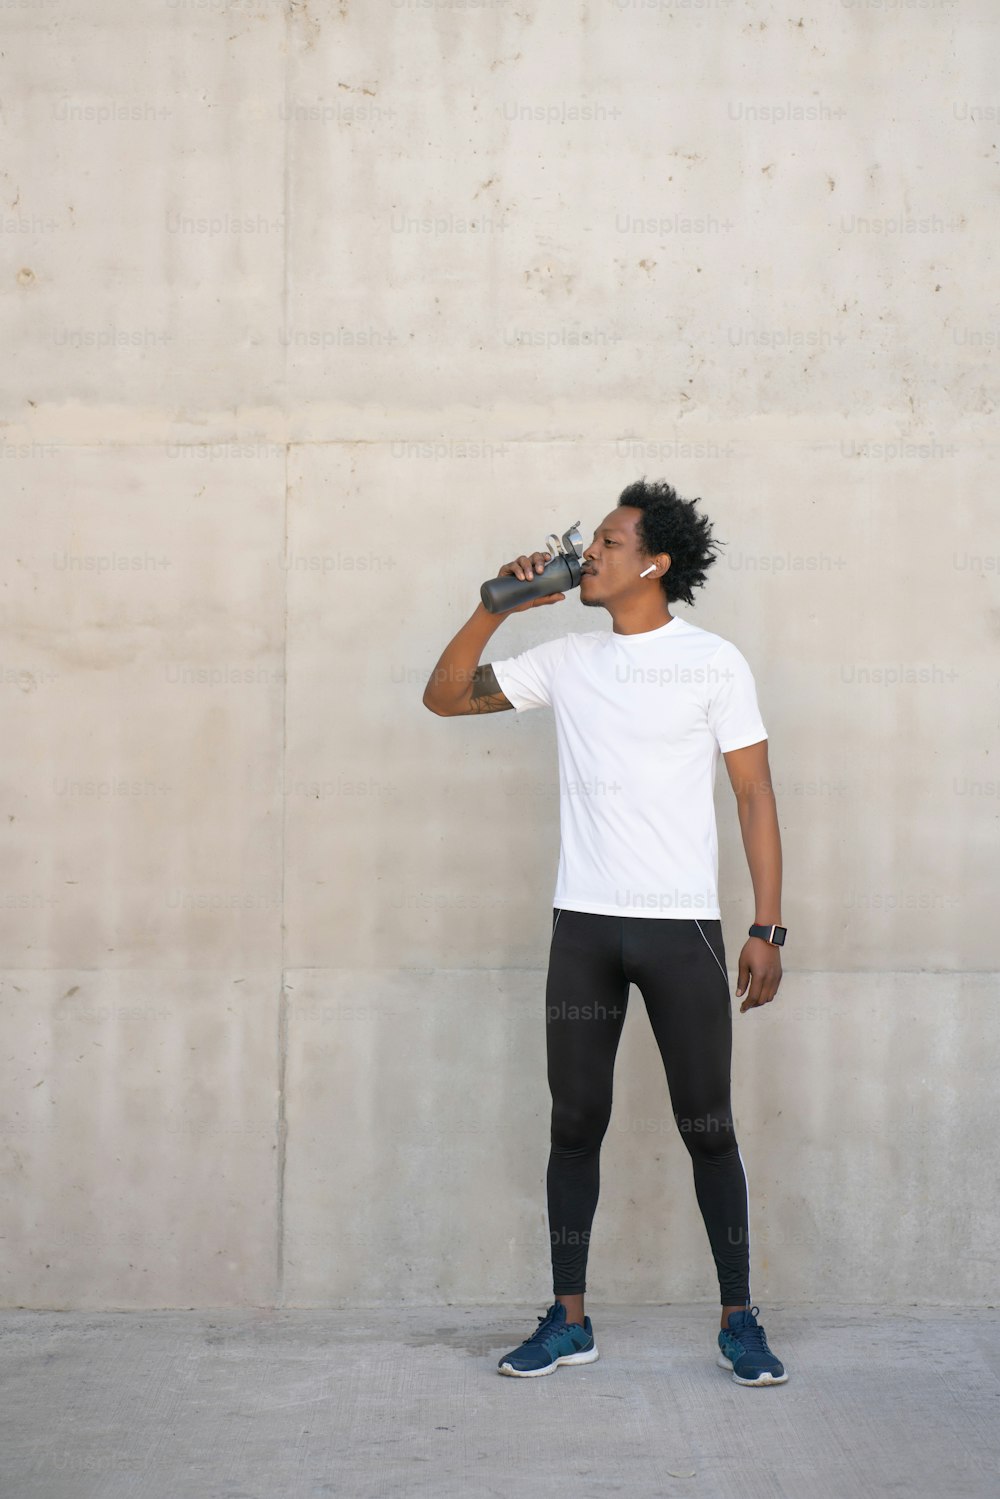 Afro athletic man drinking water and relaxing after work out outdoors. Sport and healthy lifestyle concept.